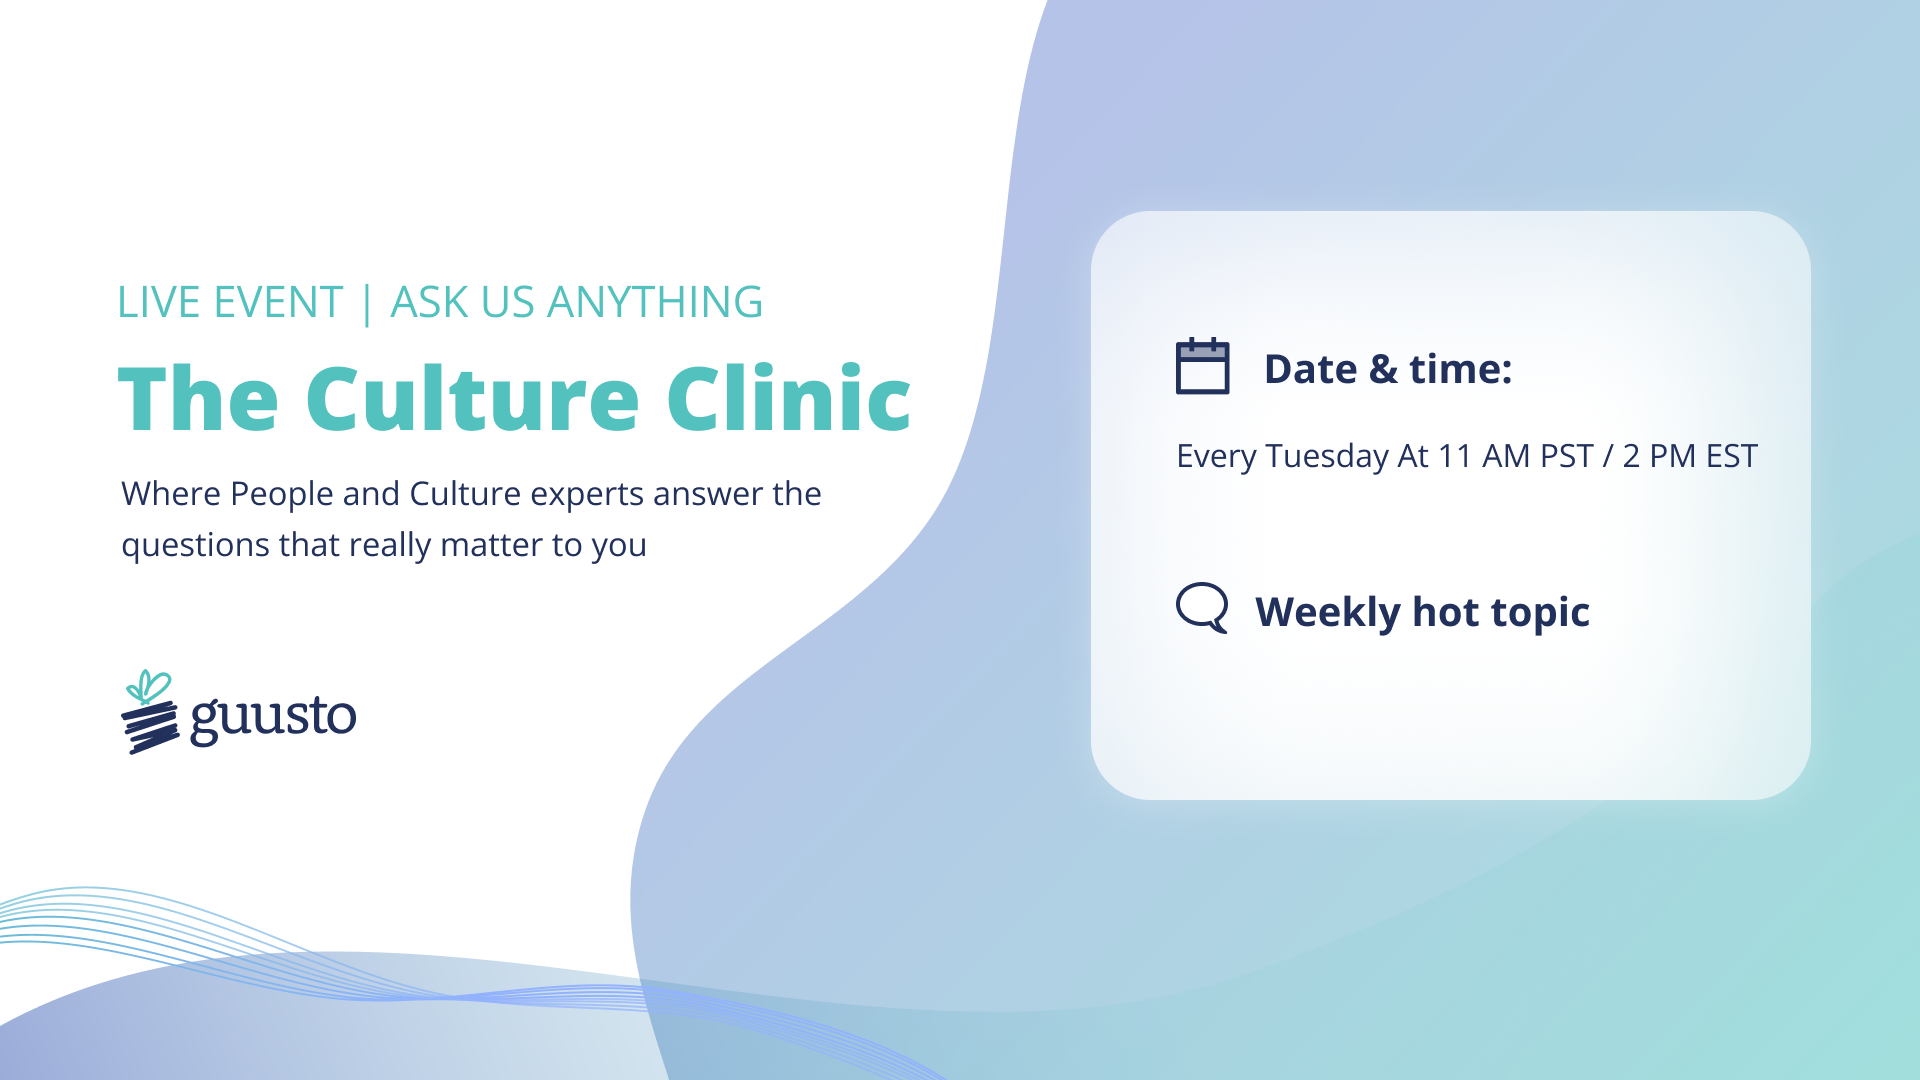 The Culture Clinic